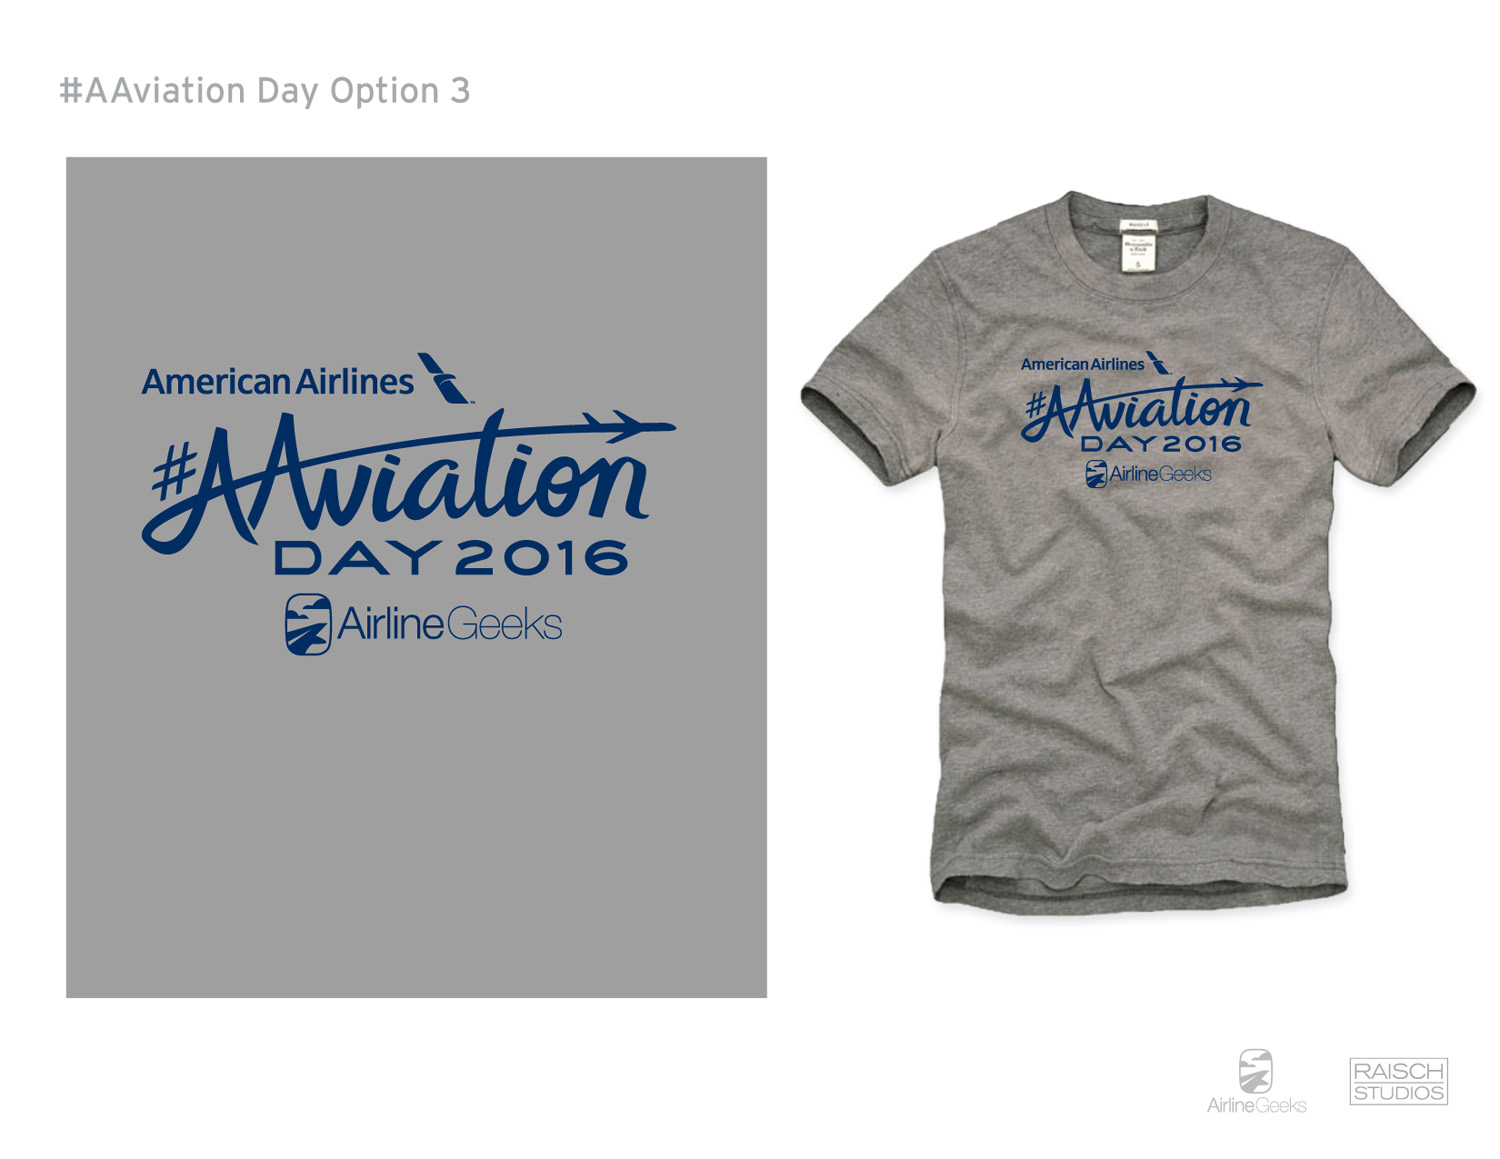 AAviation_Day_Shirts-June28-3A.jpg